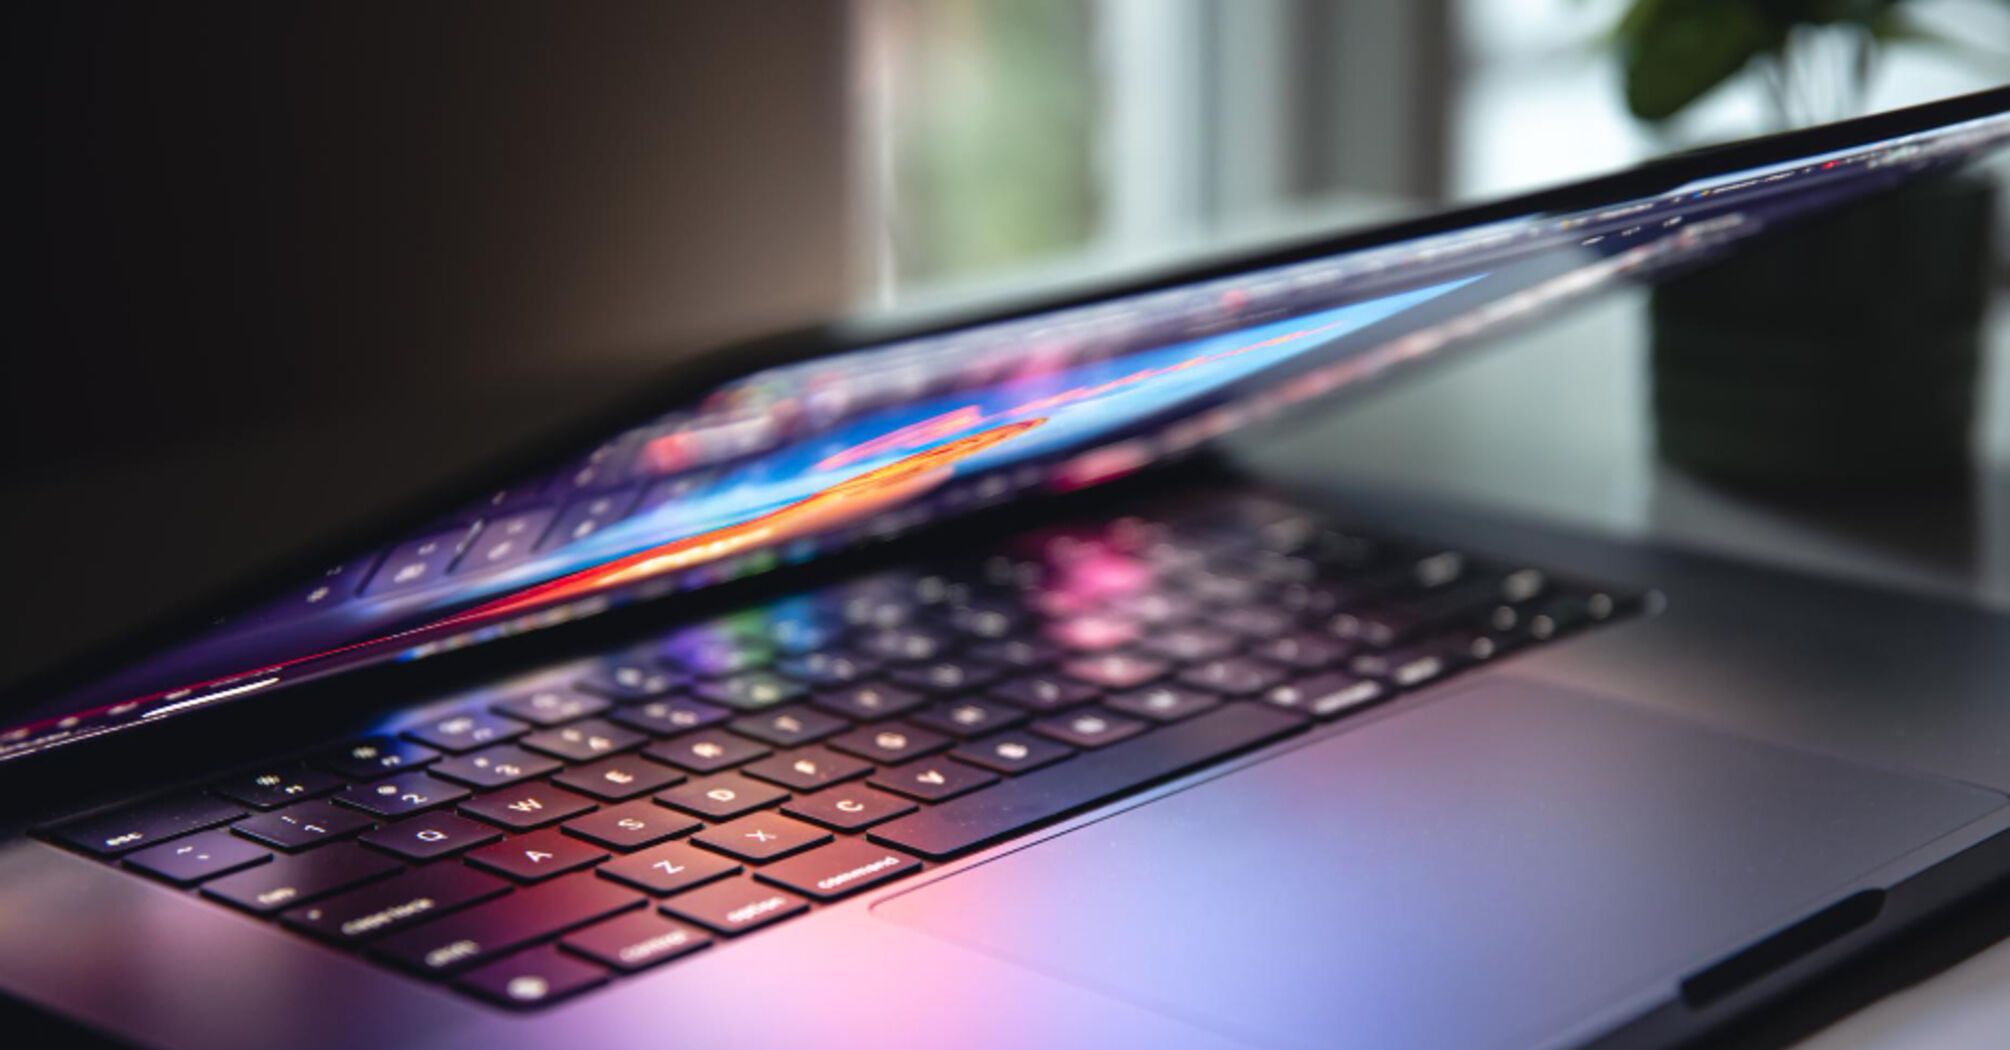 How to protect your laptop from liquid damage: 5 useful tips